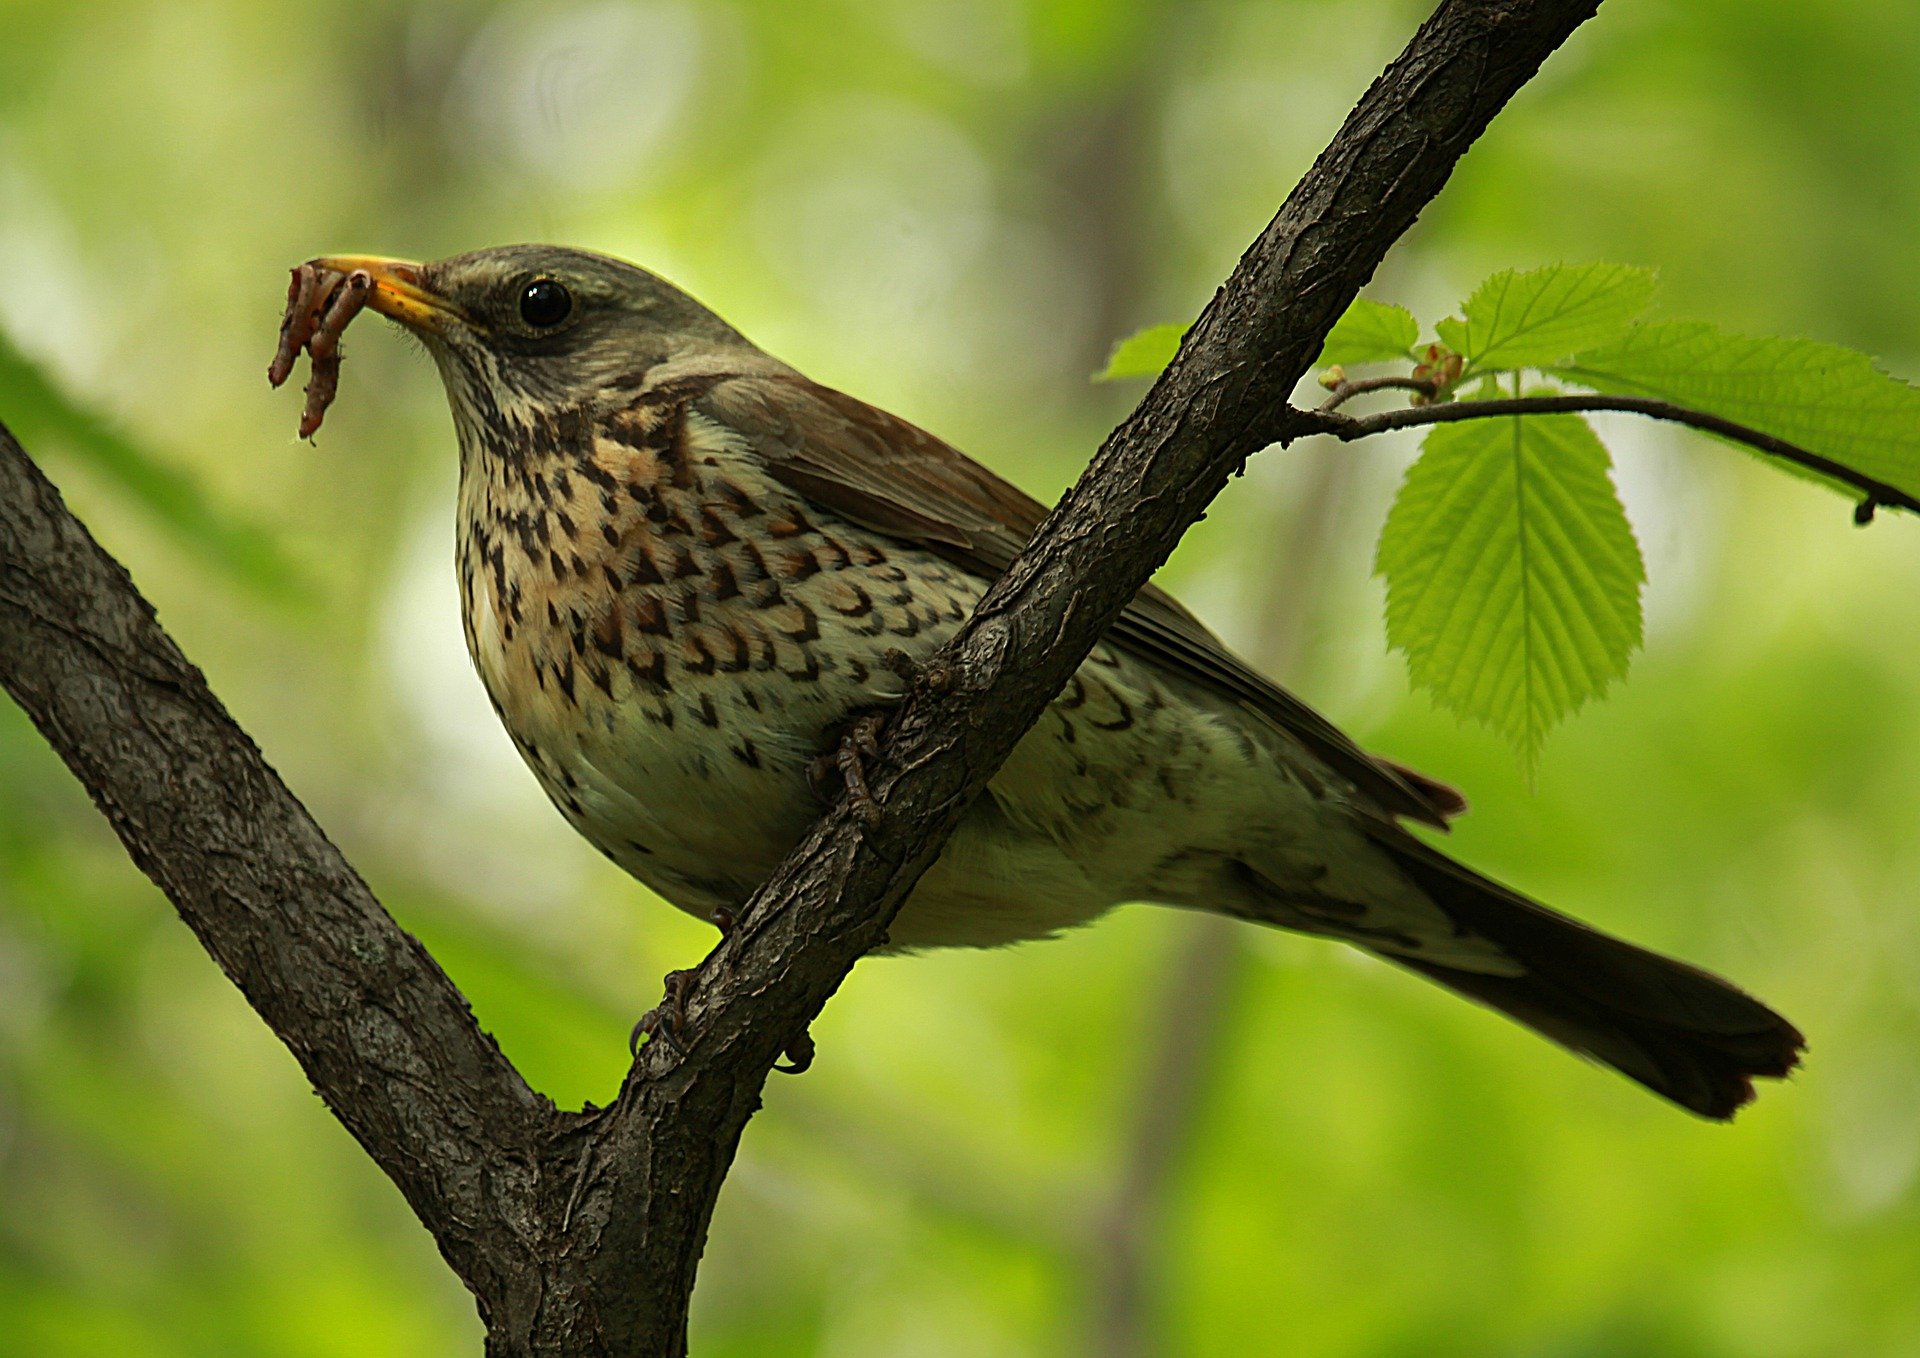 The man shared why he chose a thrush song bird to represent his wife. | Photo: Pixabay/Ирина Ирина 